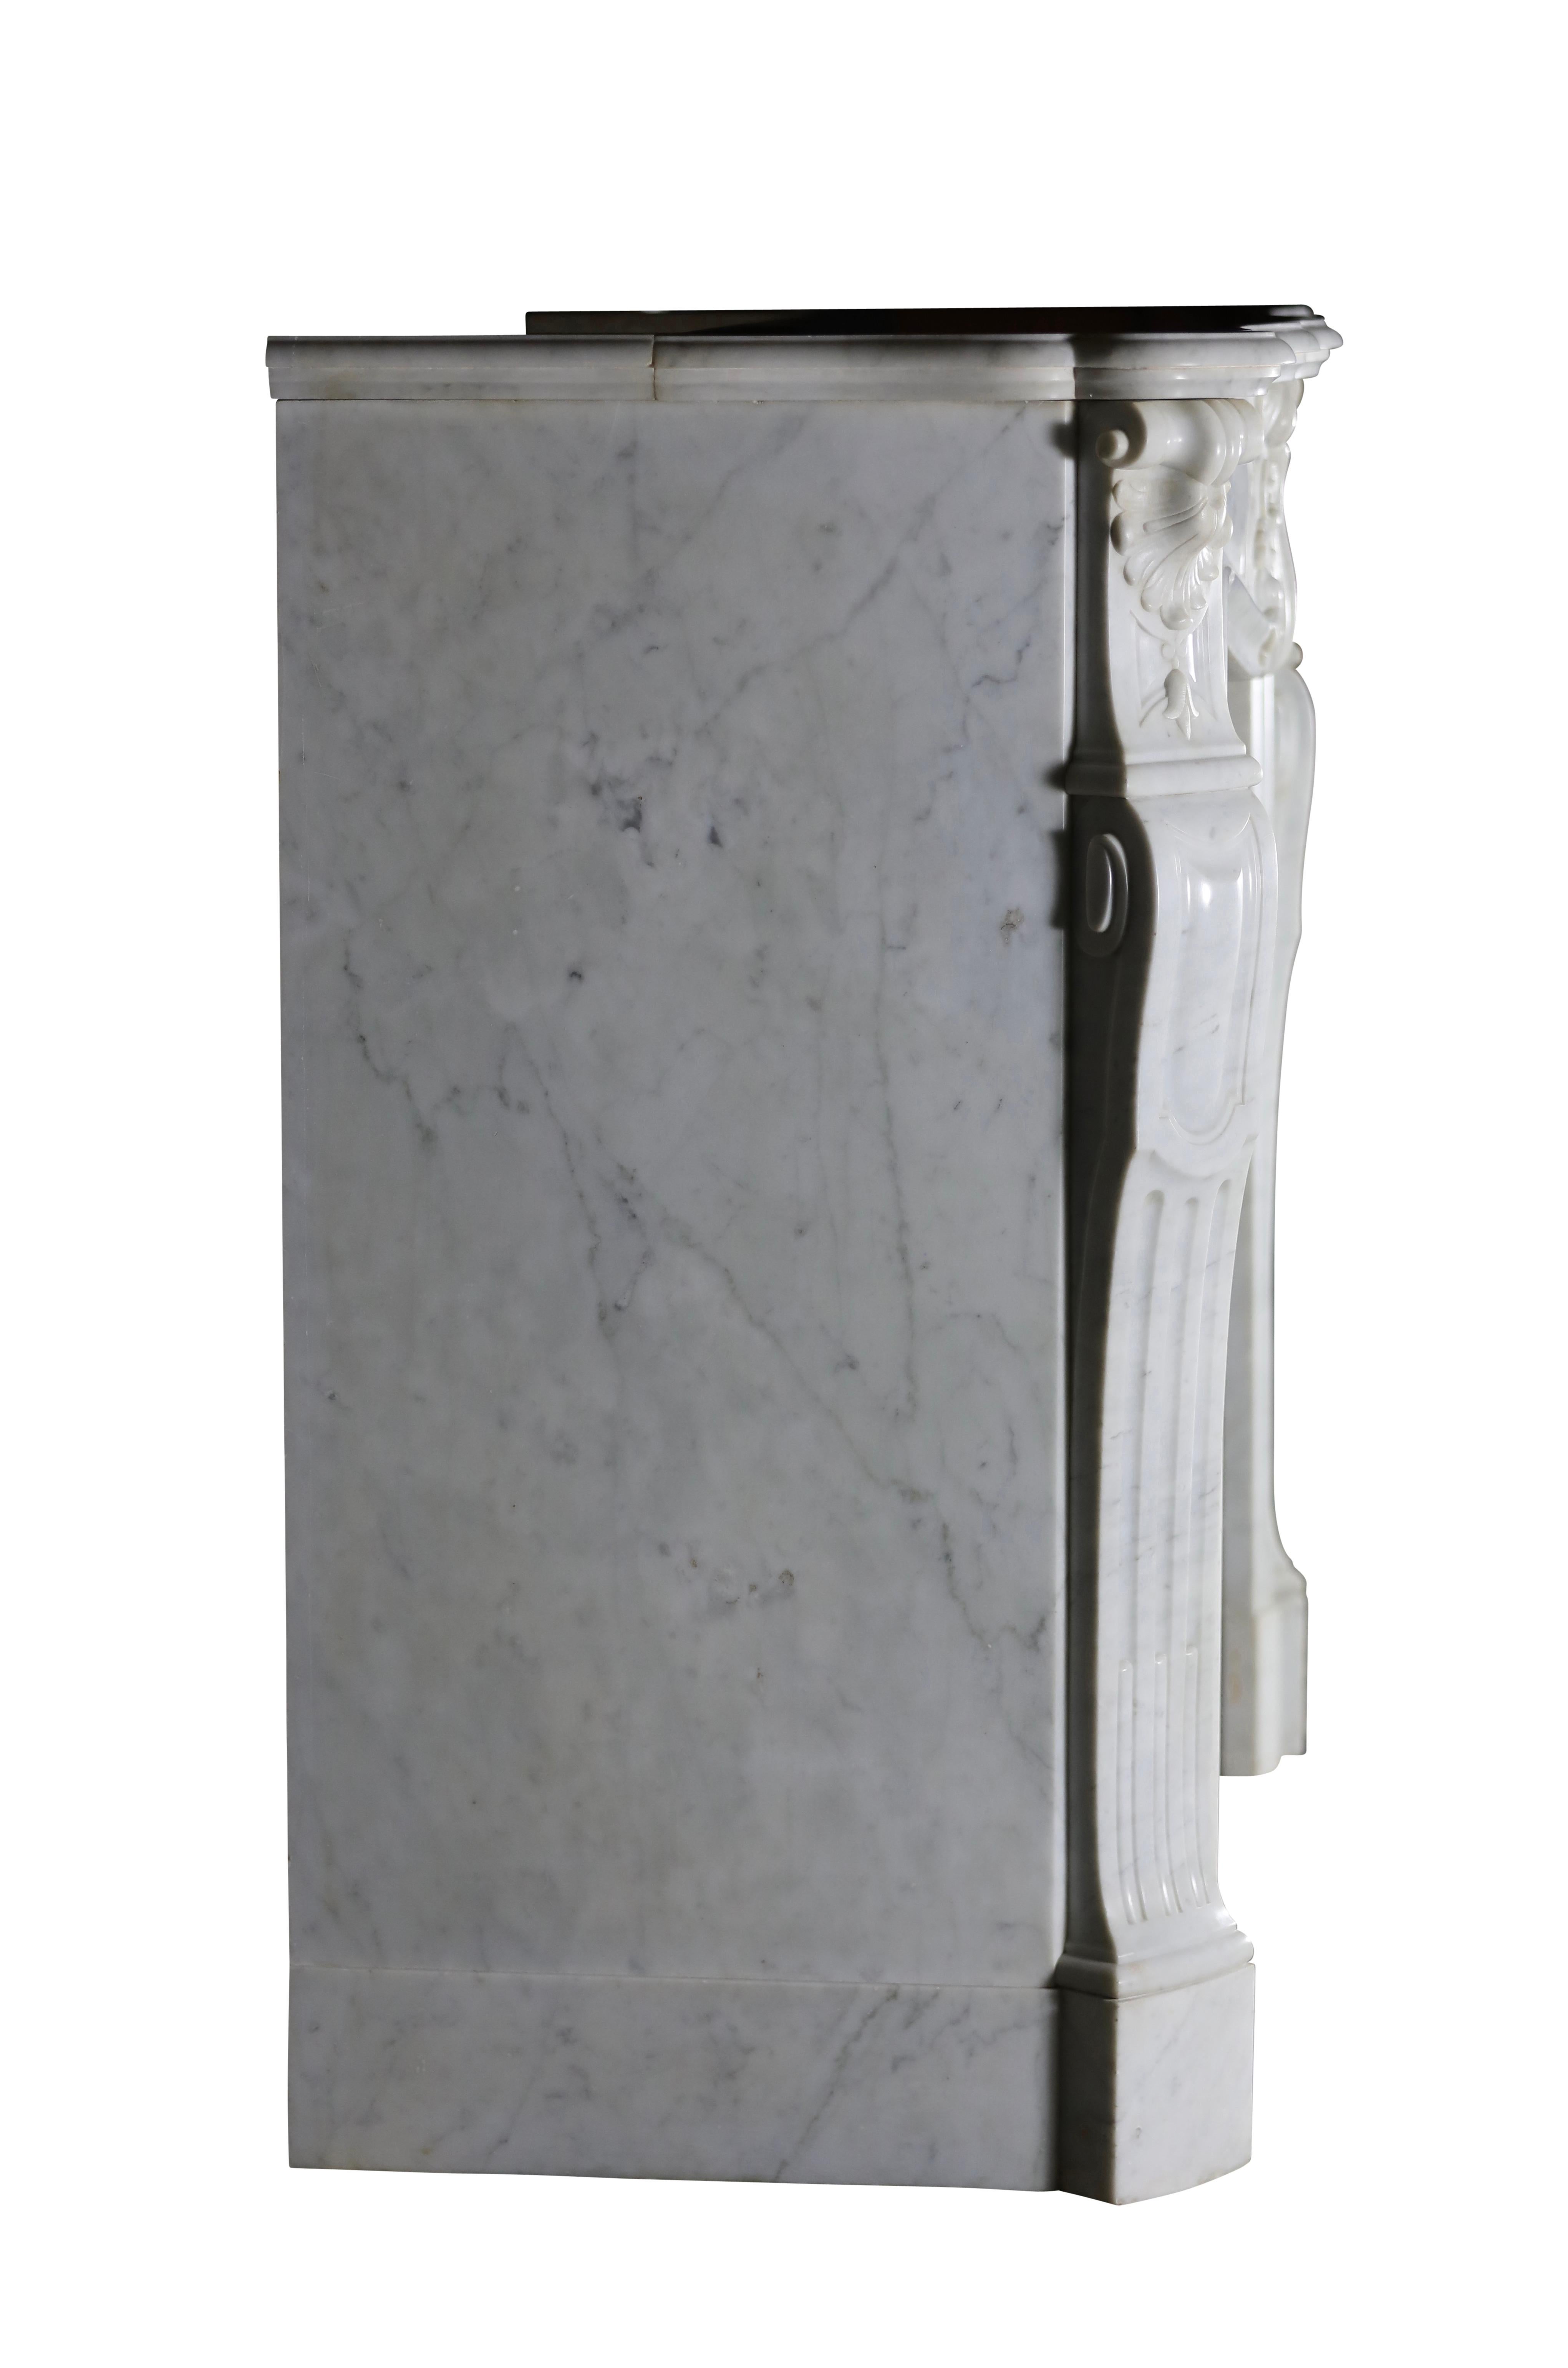 Exquisite Antique White Marble Fireplace Surround For Sale 3